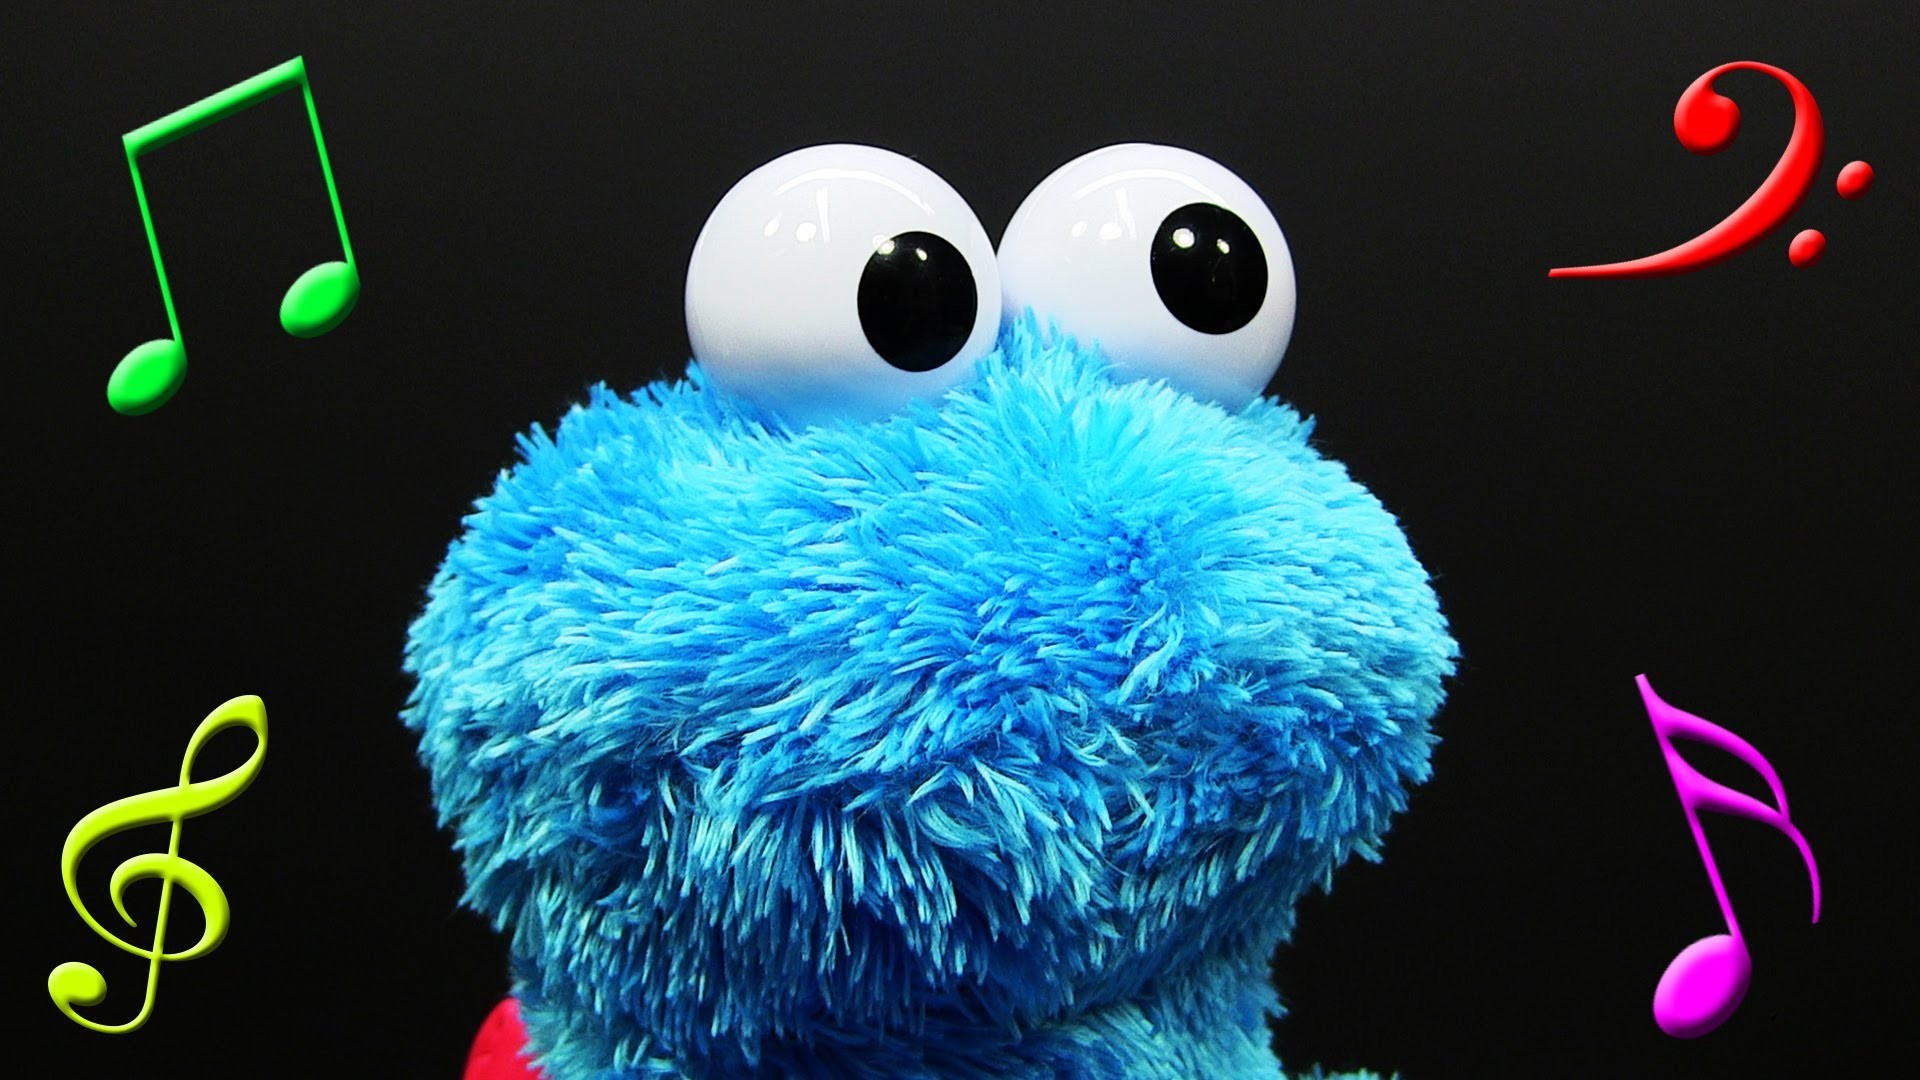 1920x1080 High Resolution Cookie Monster Music Wallpaper Hd 1080p Full Size .